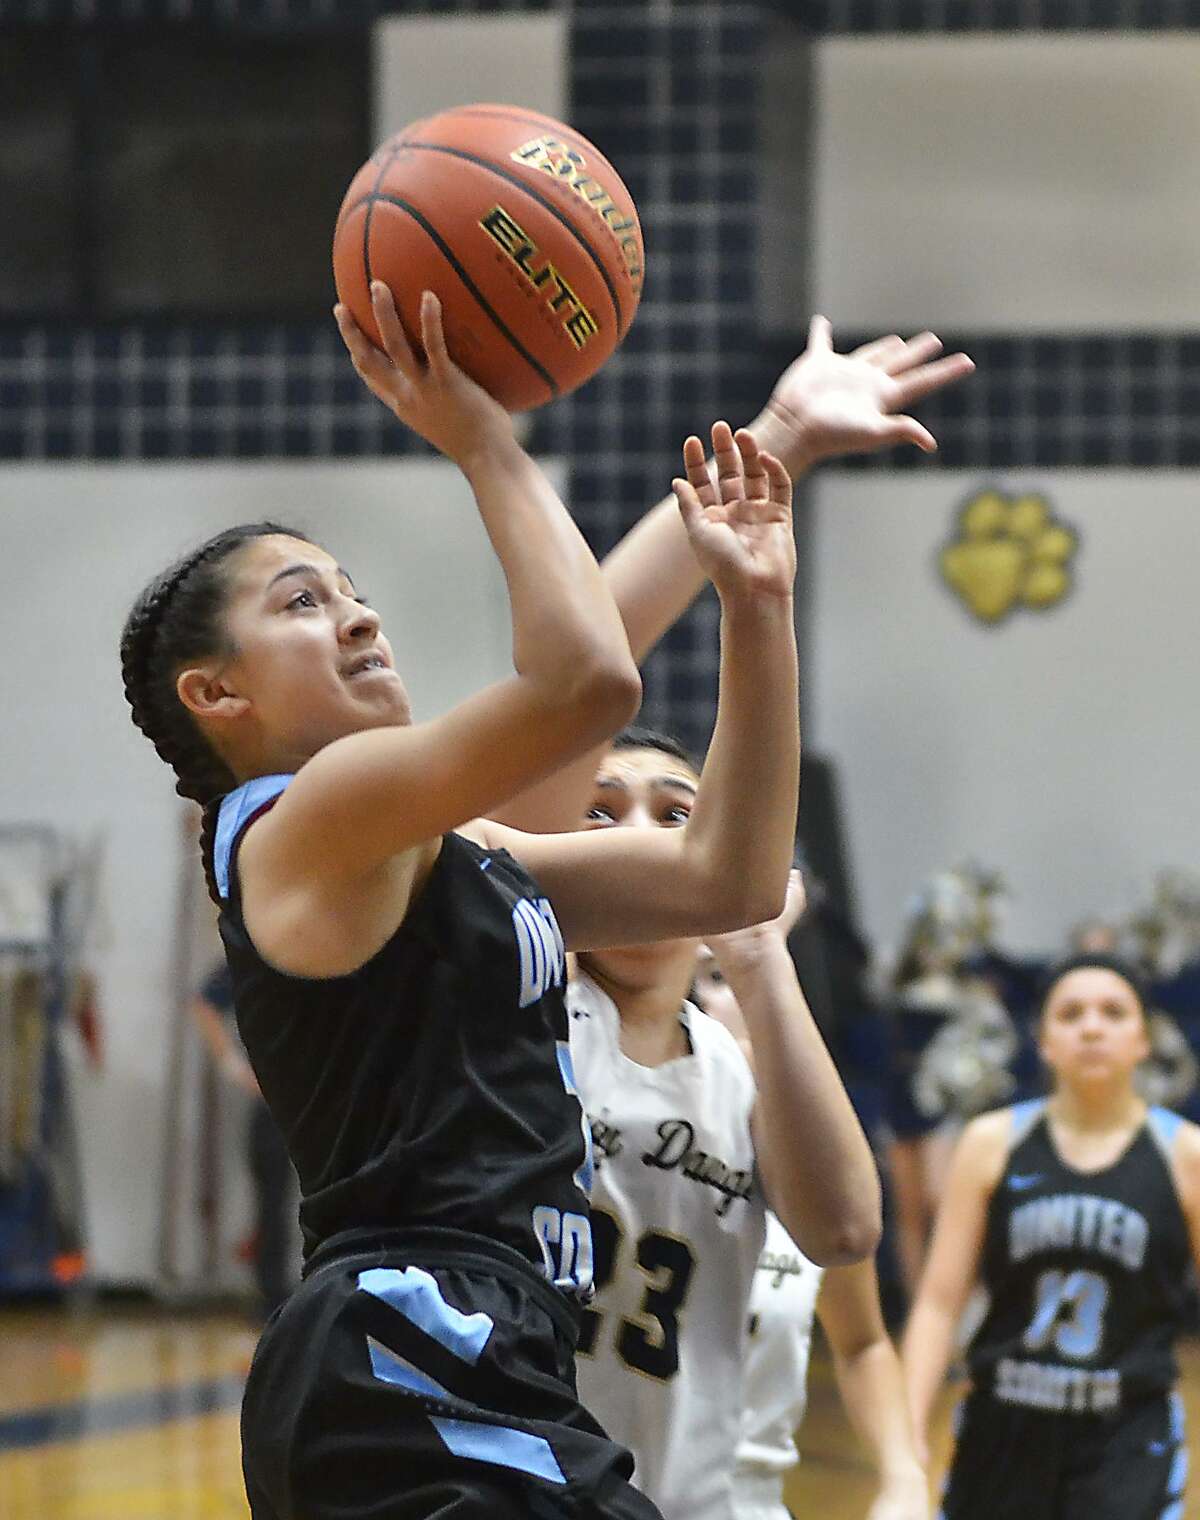 Angelina Lopez and United South fell to 4-4 in the district standings after losing to third-place Alexnader Tuesday.